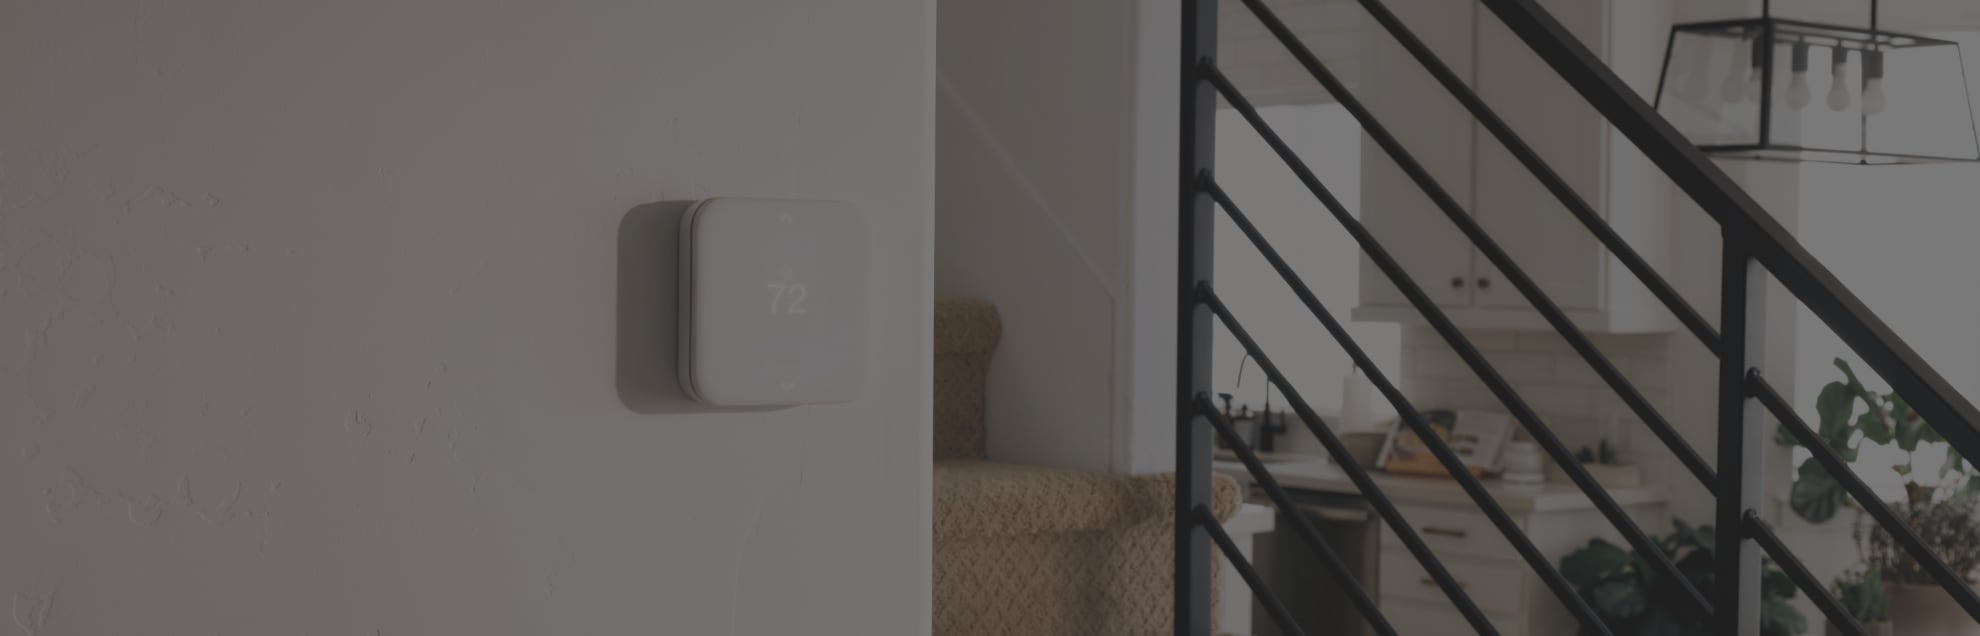 Manchester Smart Thermostat